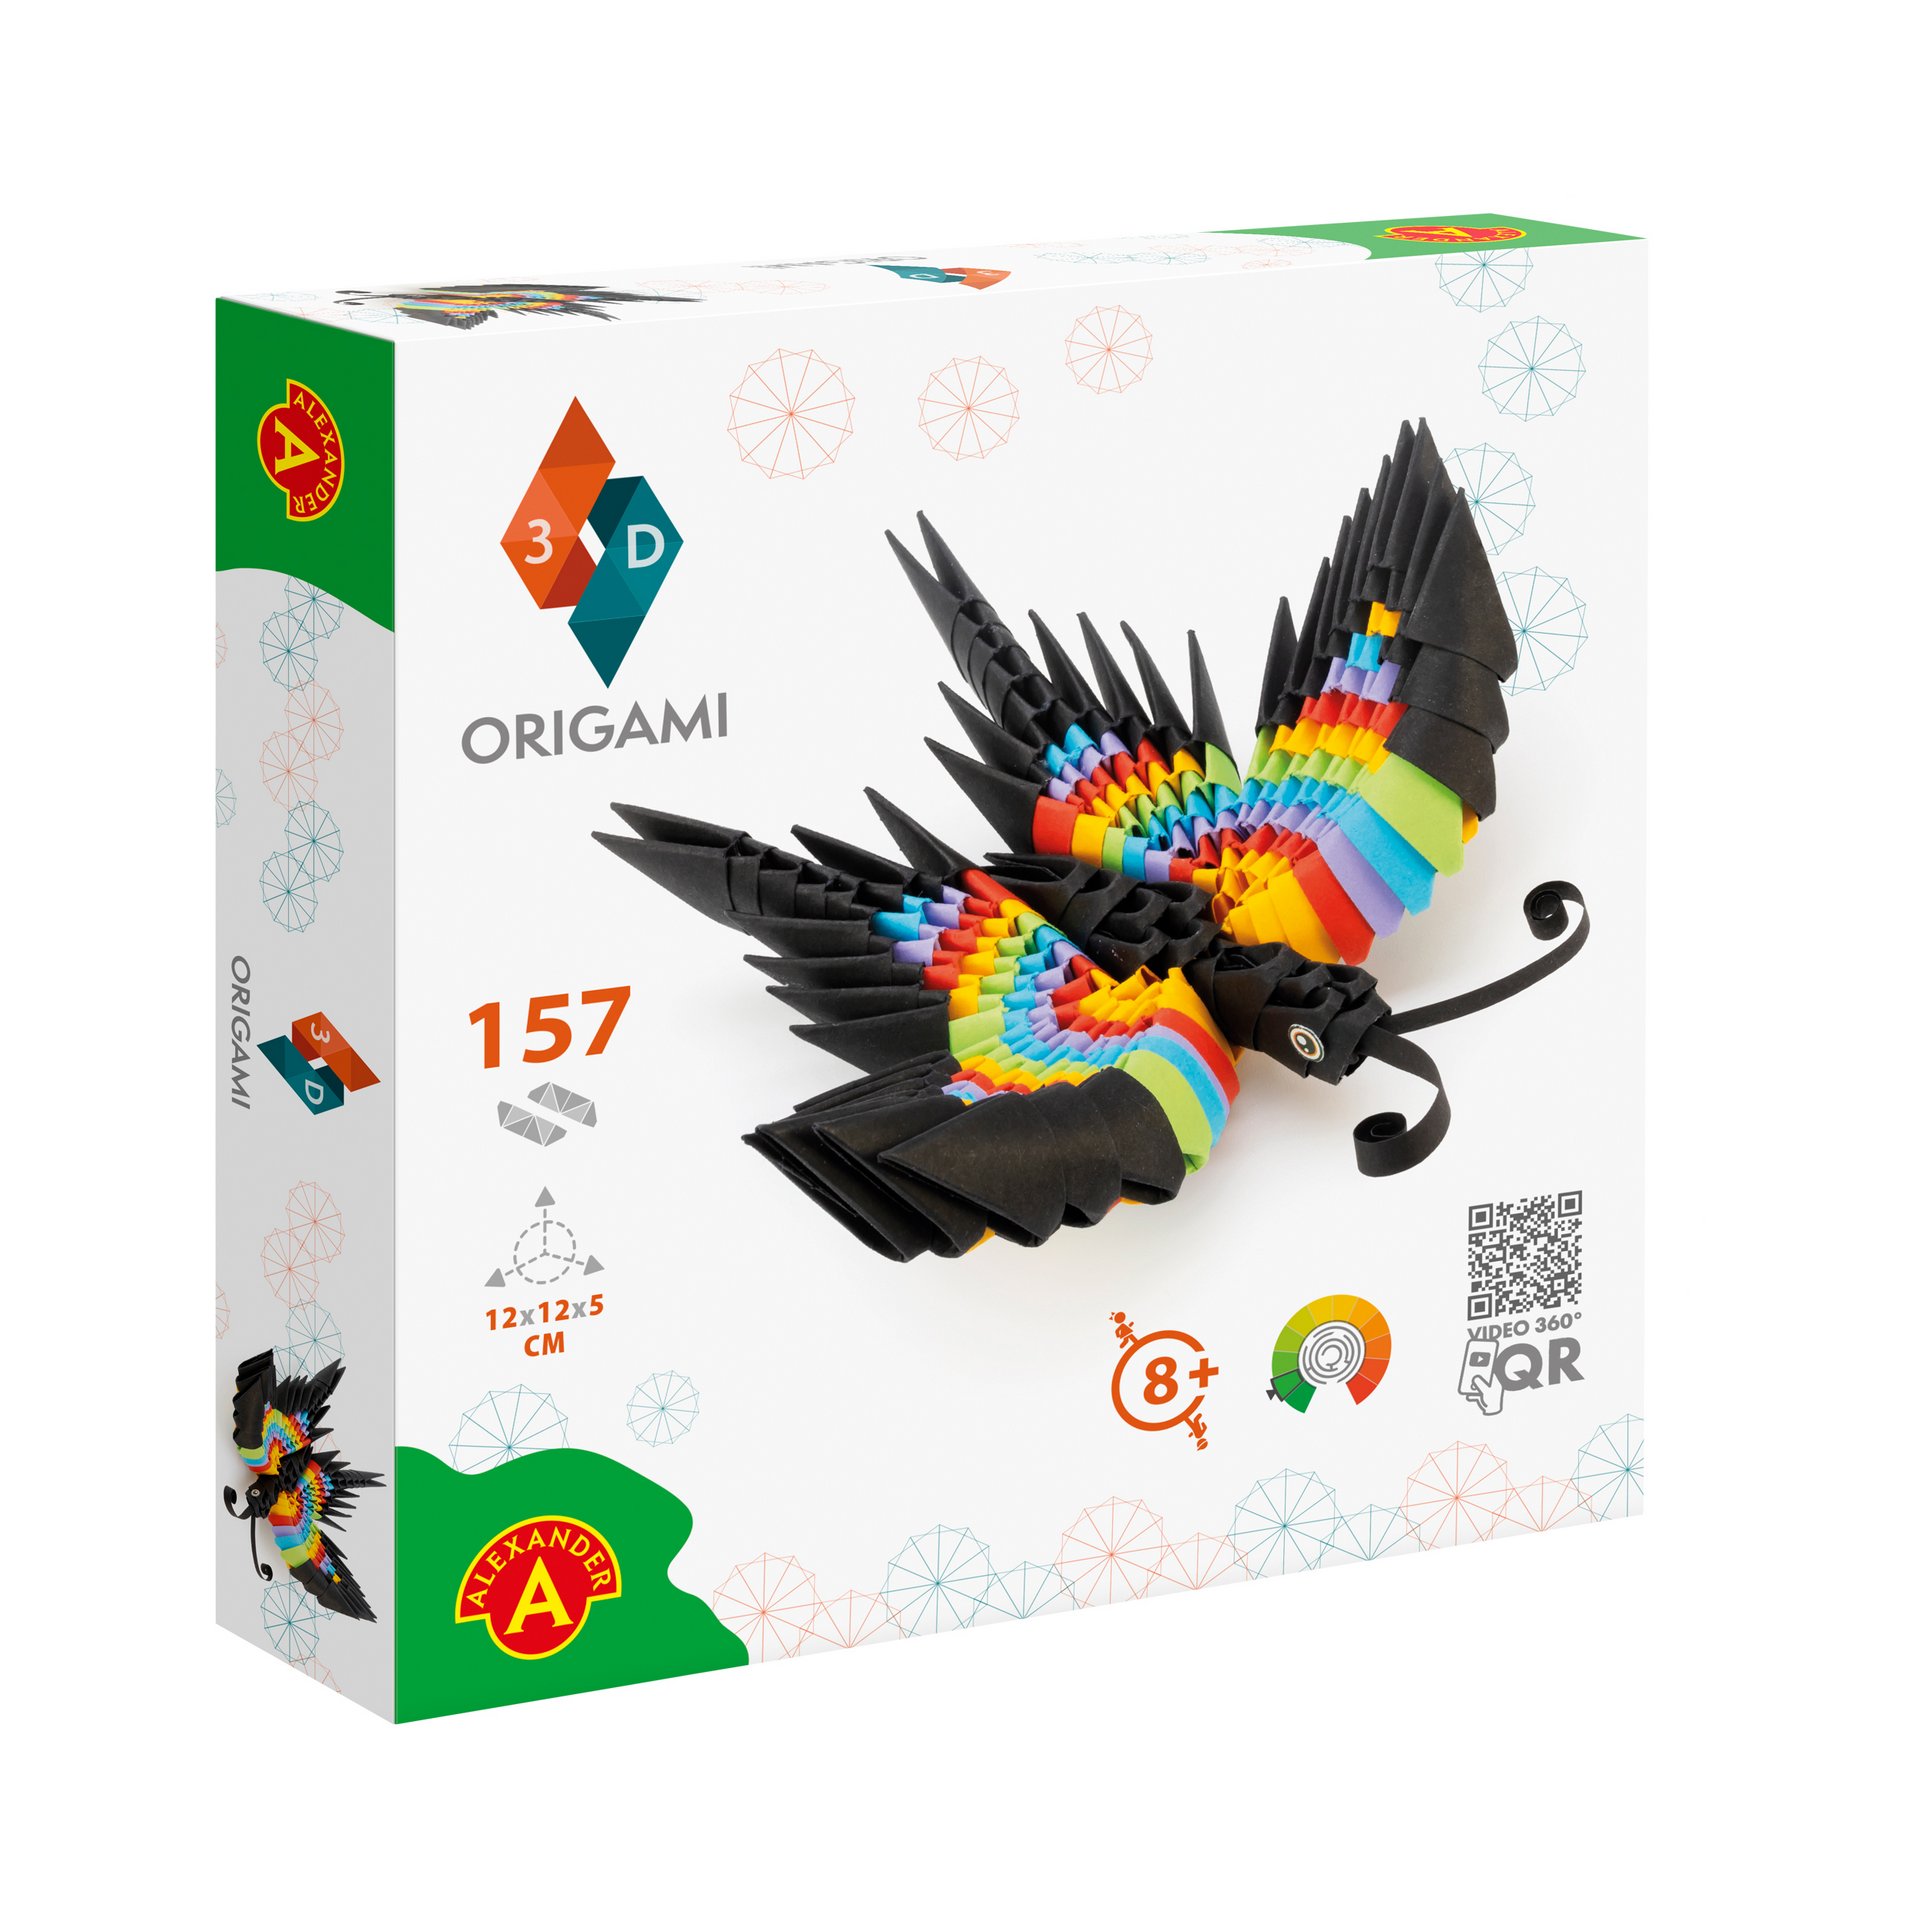 ORIGAMI 3D – Butterfly - Alexander - one of the largest toys 